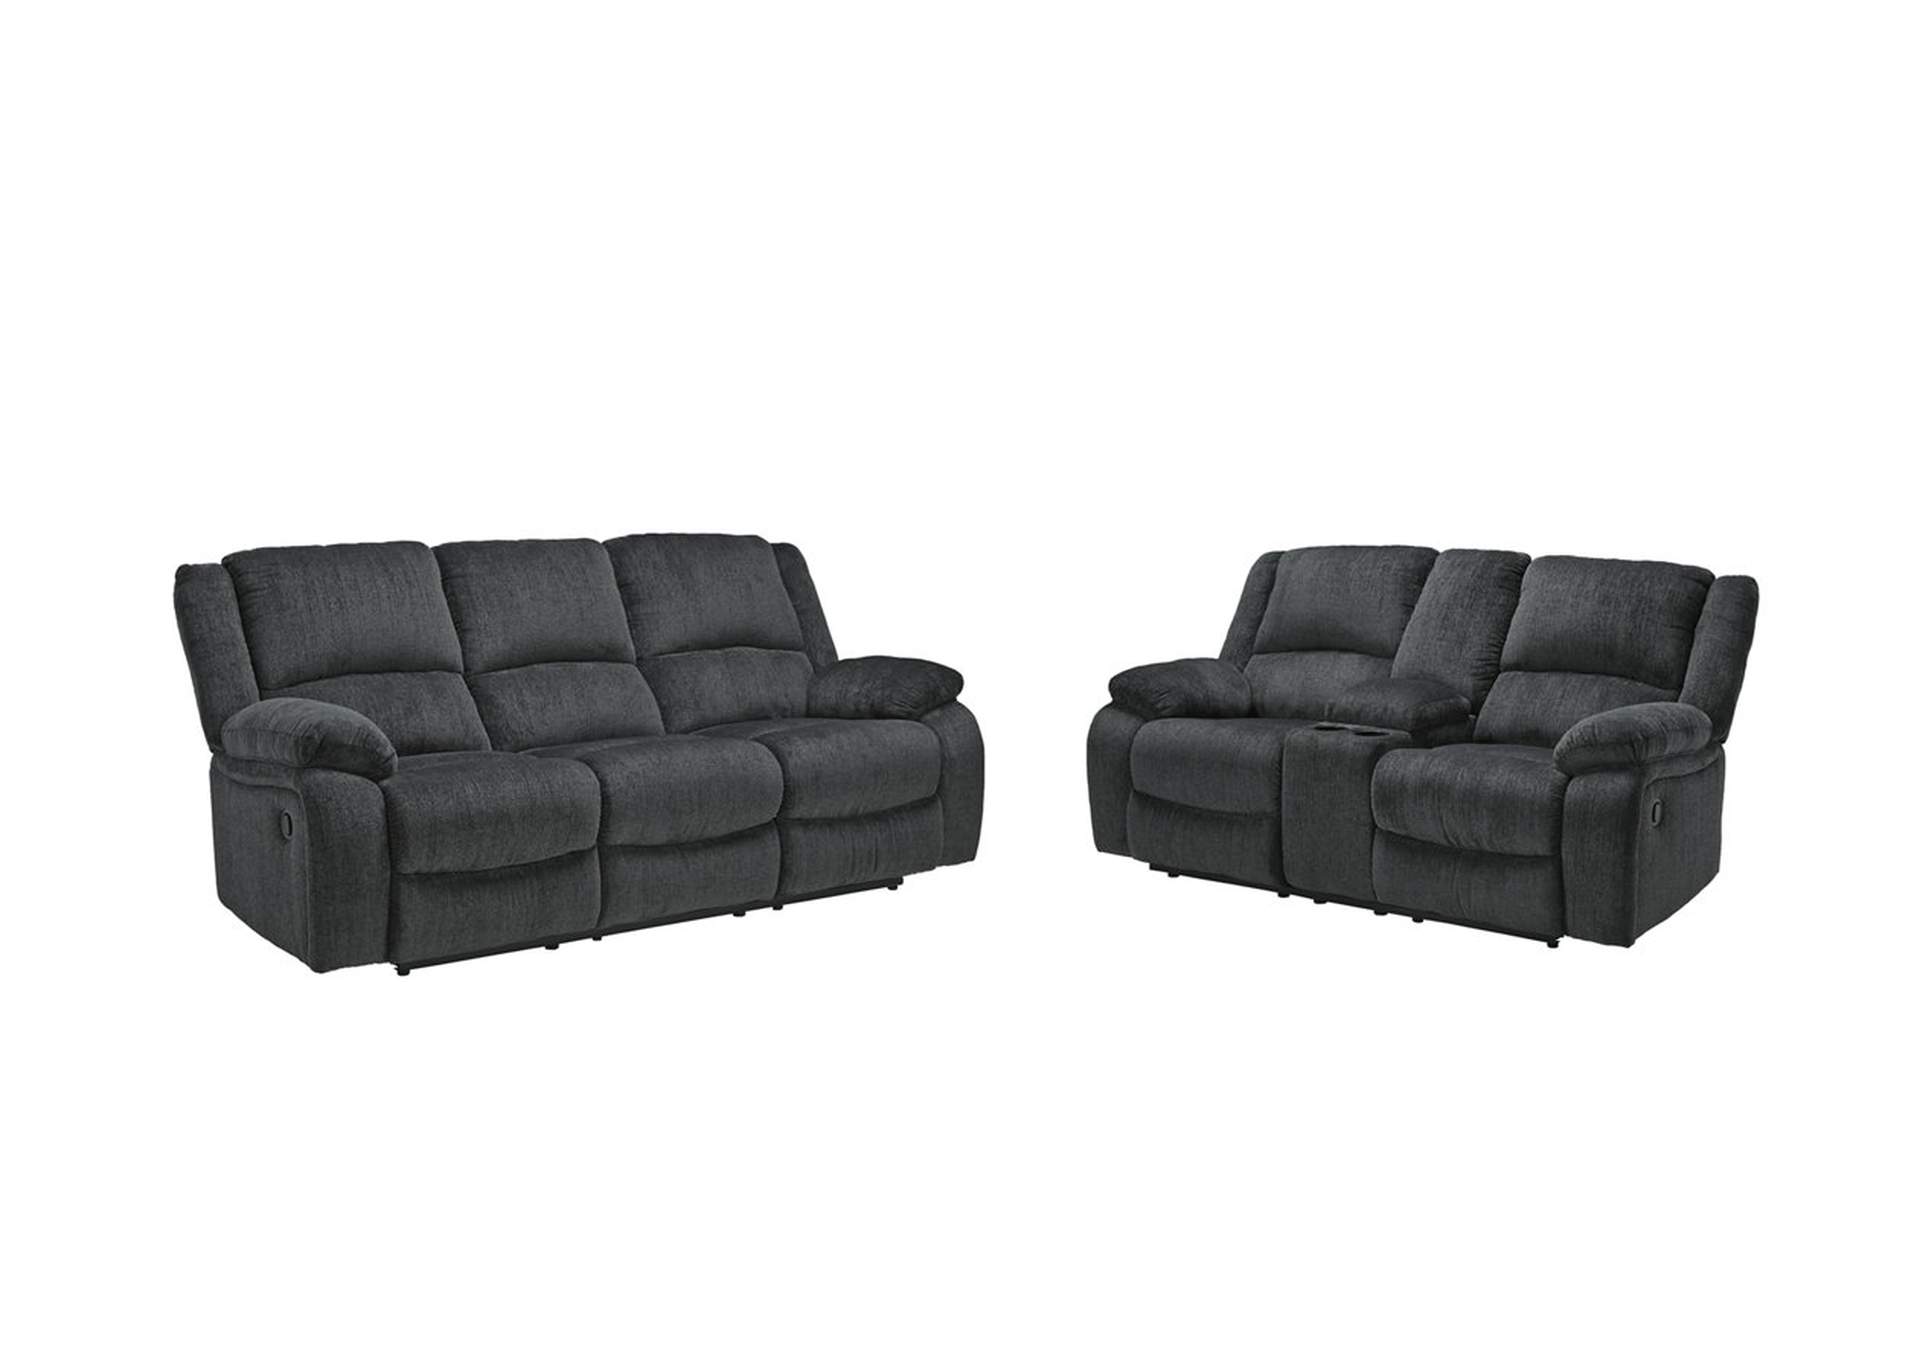 Draycoll Sofa and Loveseat,Signature Design By Ashley